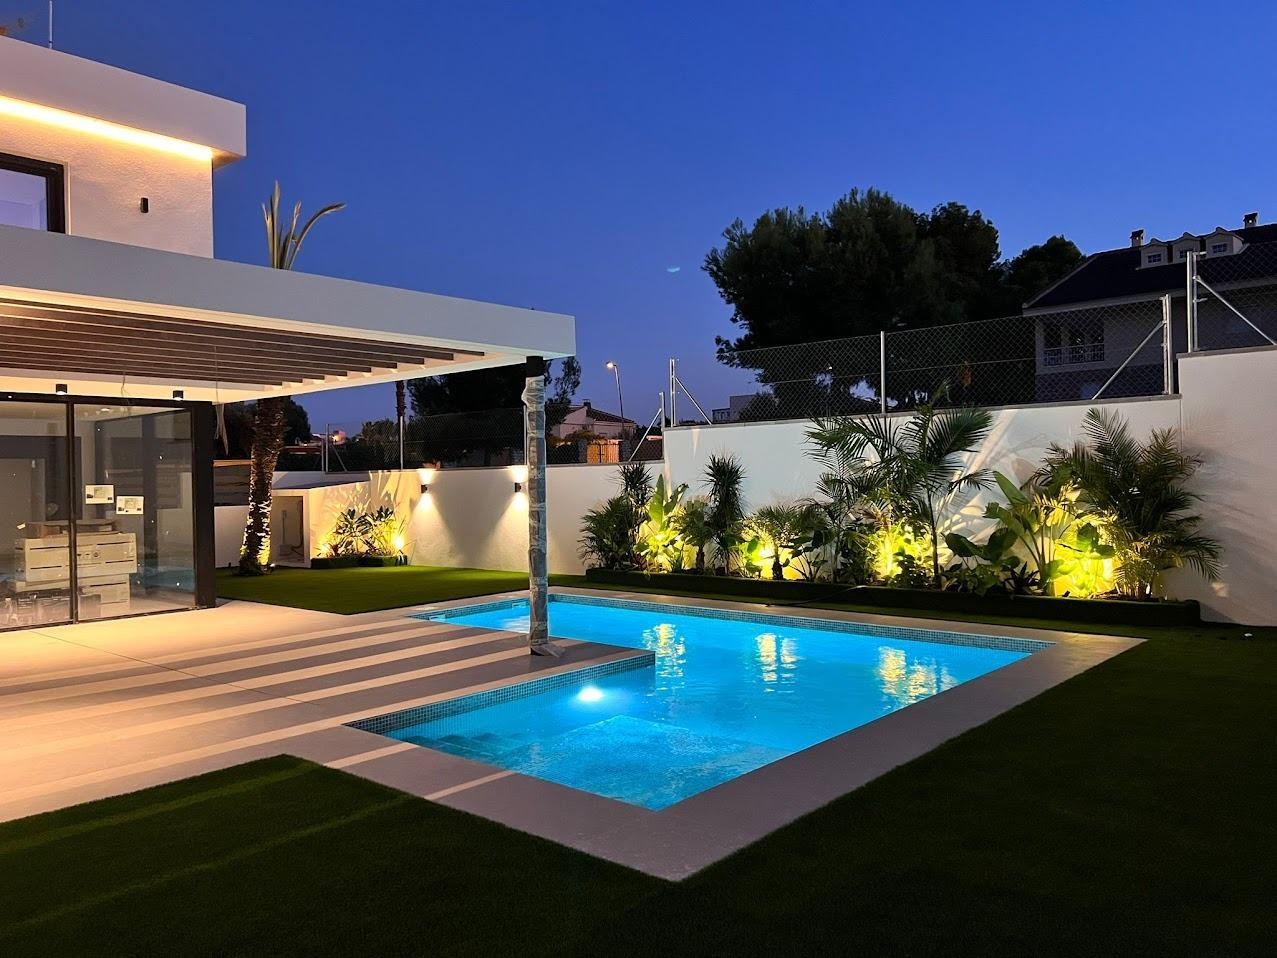 Townhouse for sale in Alicante 1